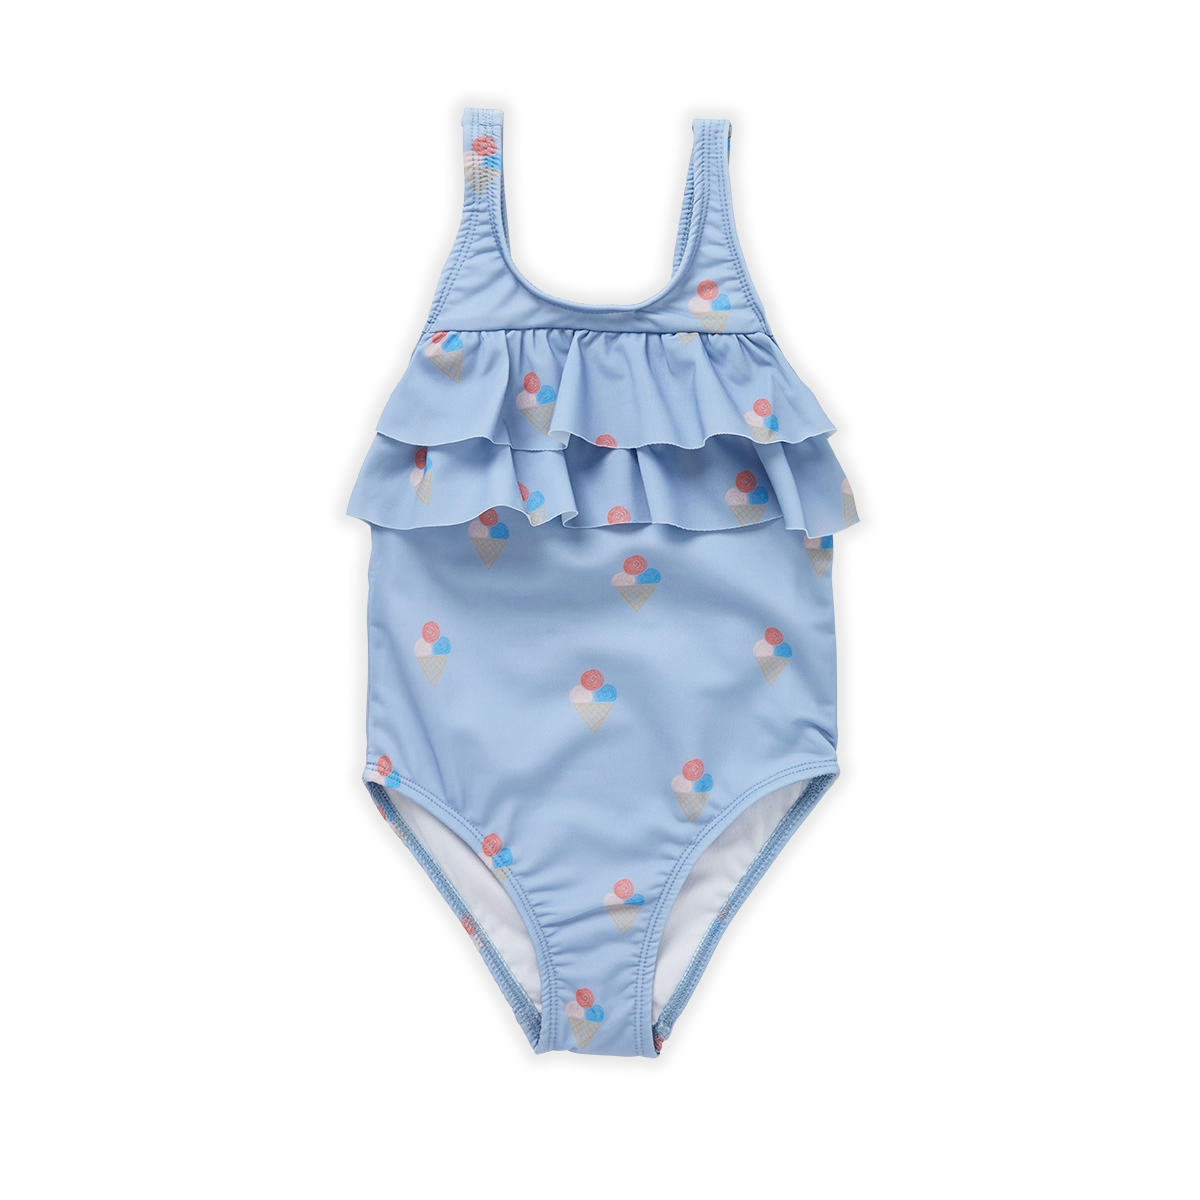 SPROET & SPROUT LIGHT BLUE ICE CREAM PRINT RUFFLE SWIMSUIT [FINAL SALE]